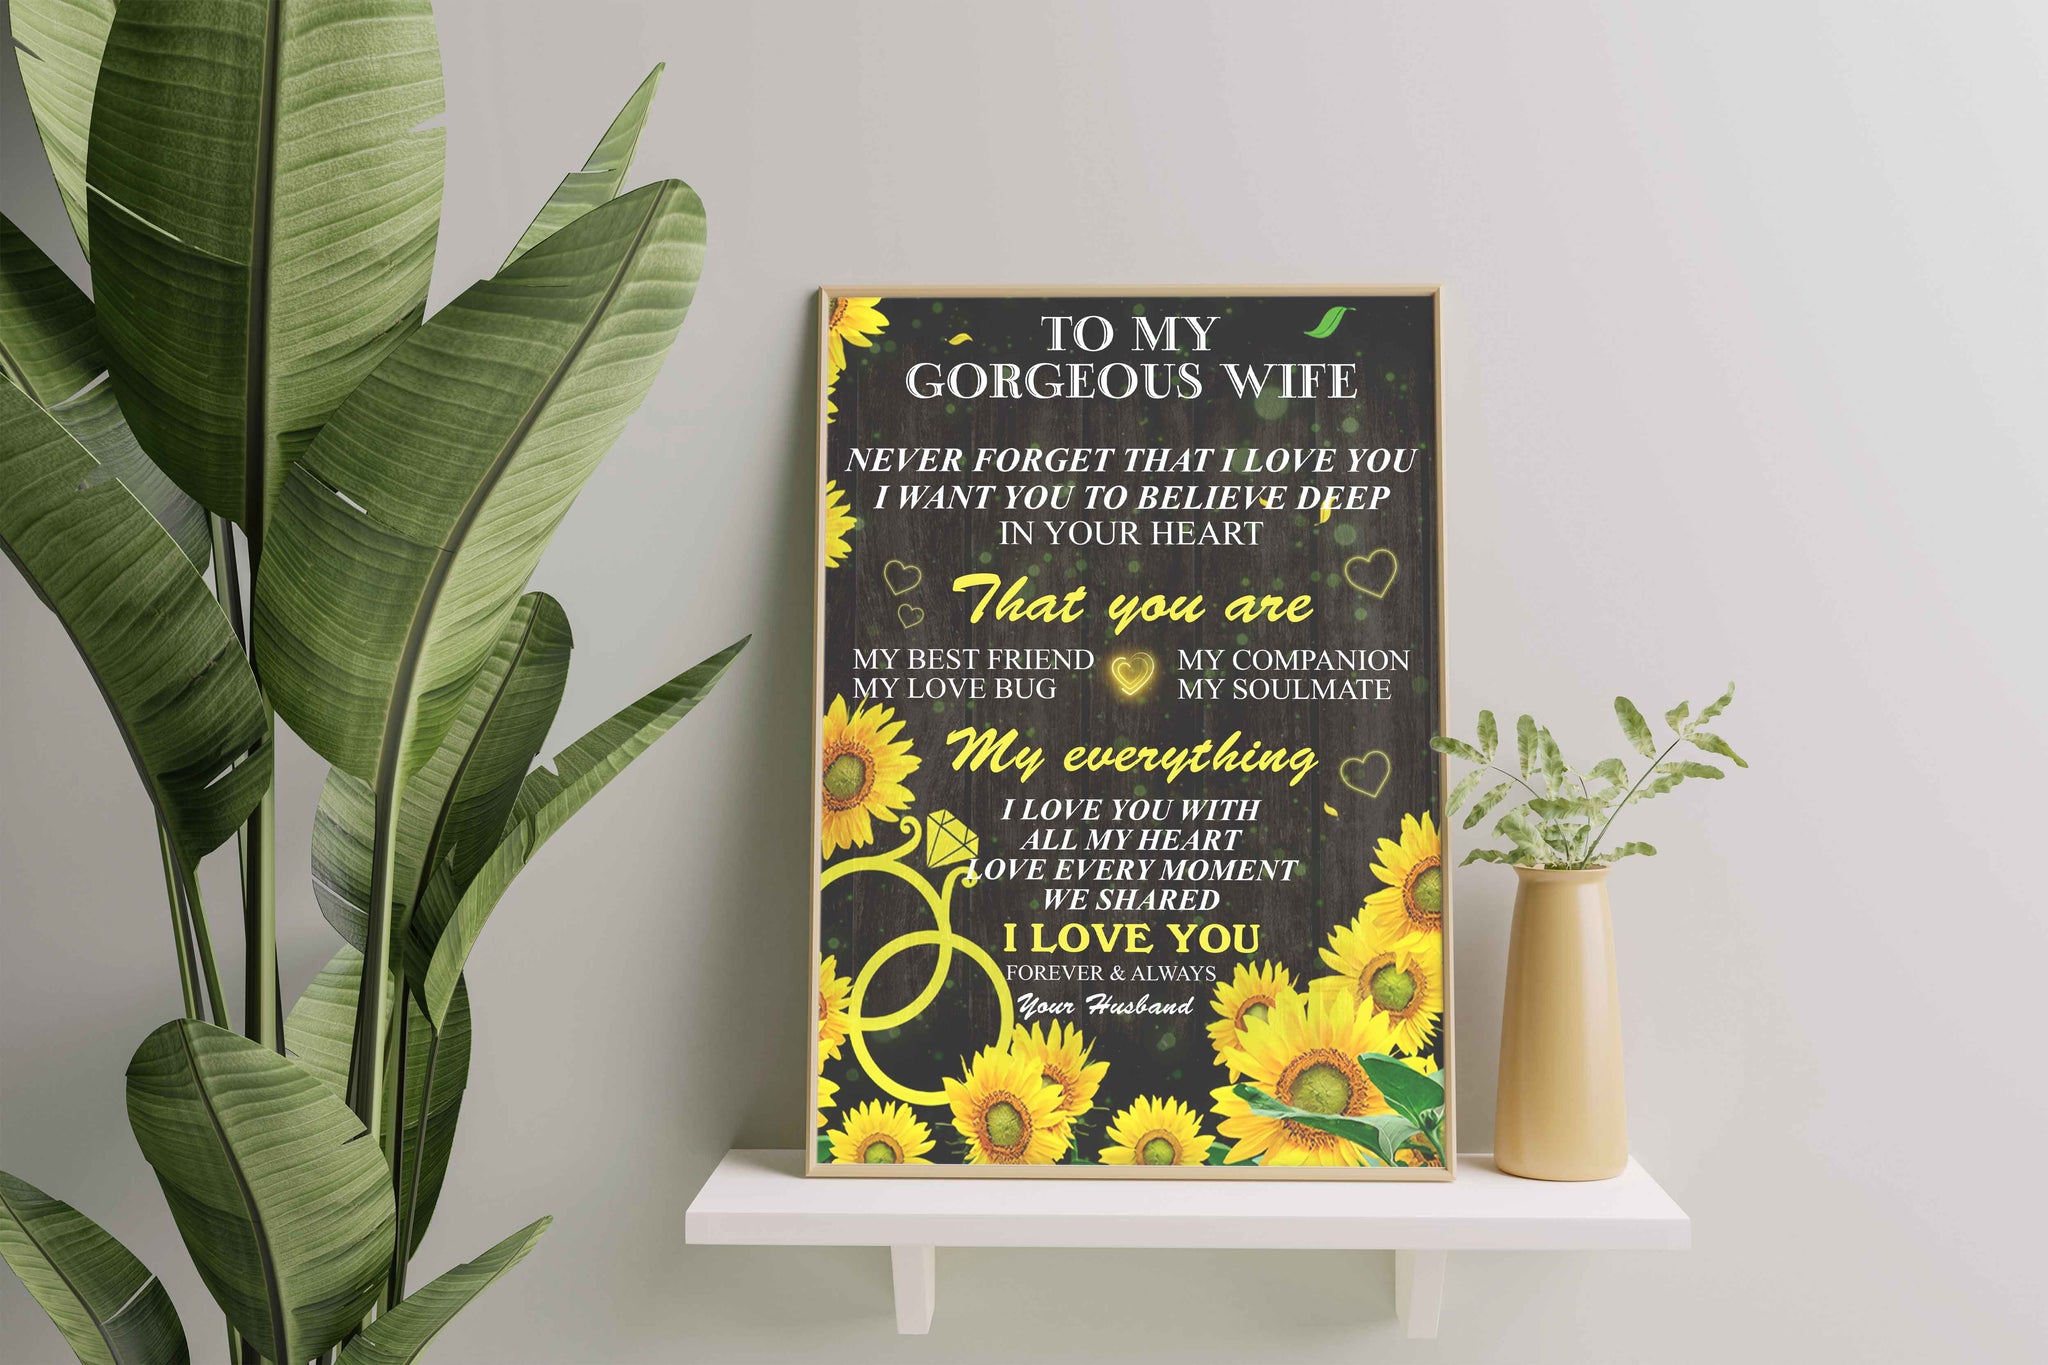 Husband To My Gorgeous Wife, Sunflower Never Forget That, You Are My Everything Great-TT2501